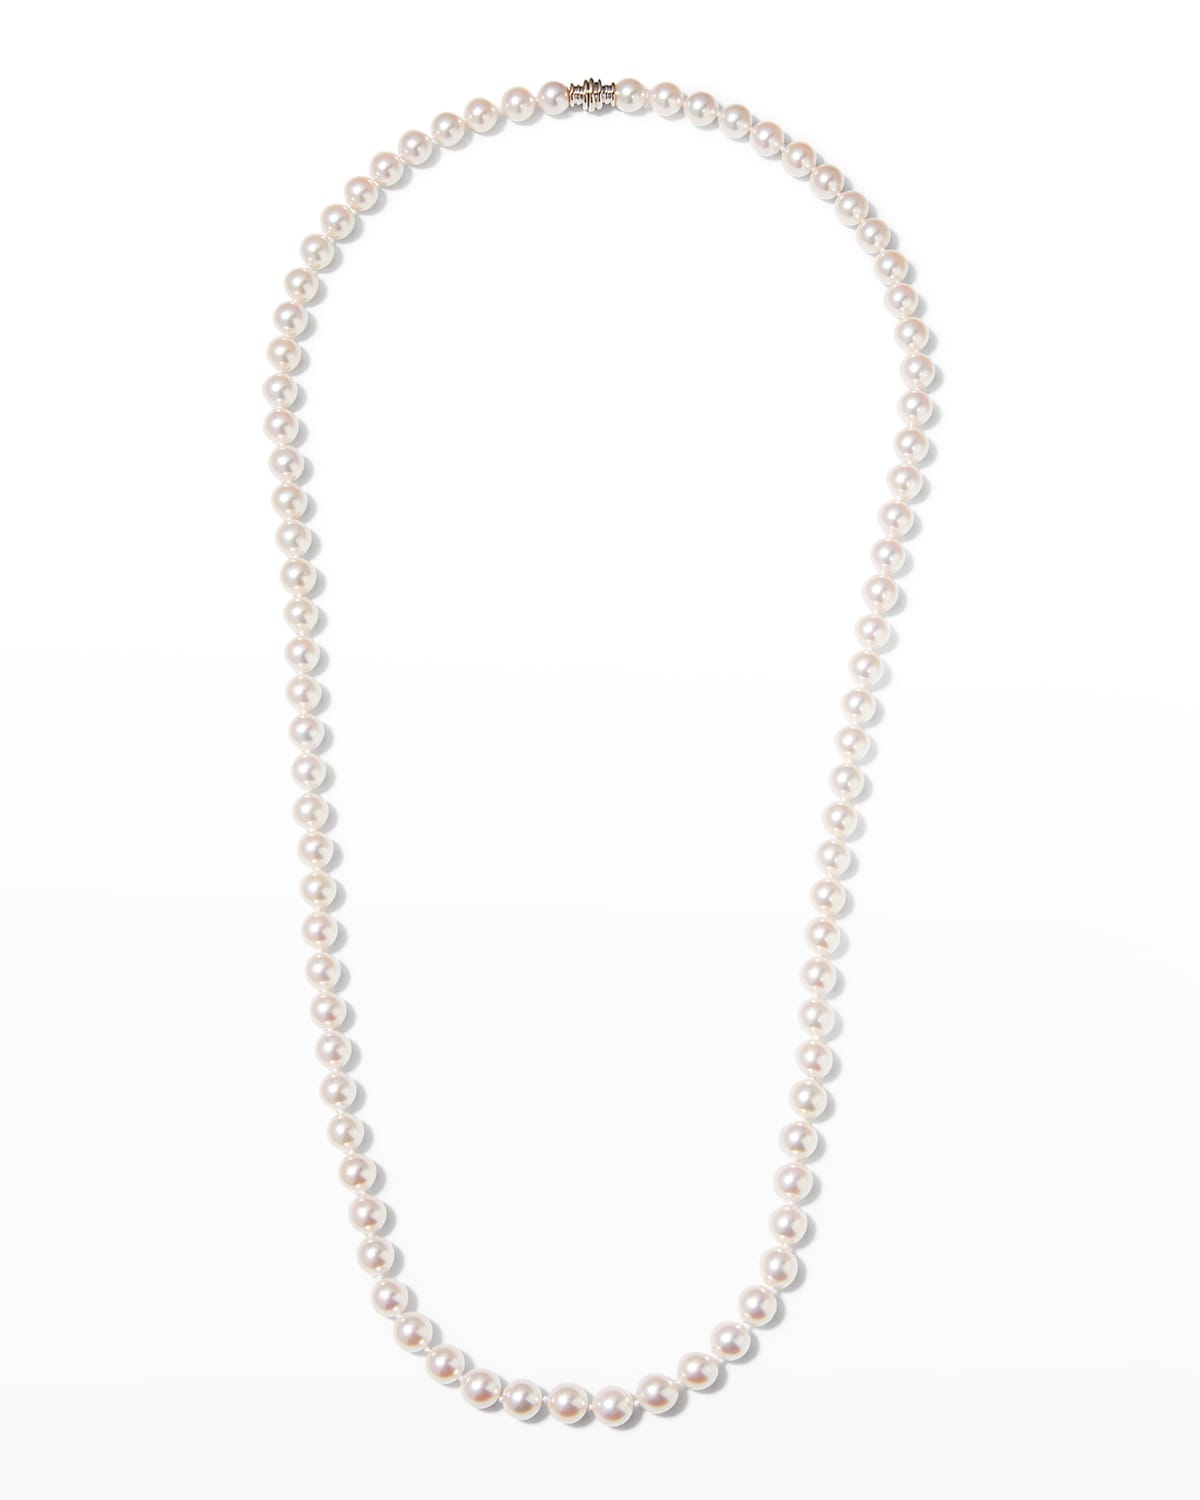 Assael 32" Akoya Cultured 9.5mm Pearl Necklace with White Gold Clasp